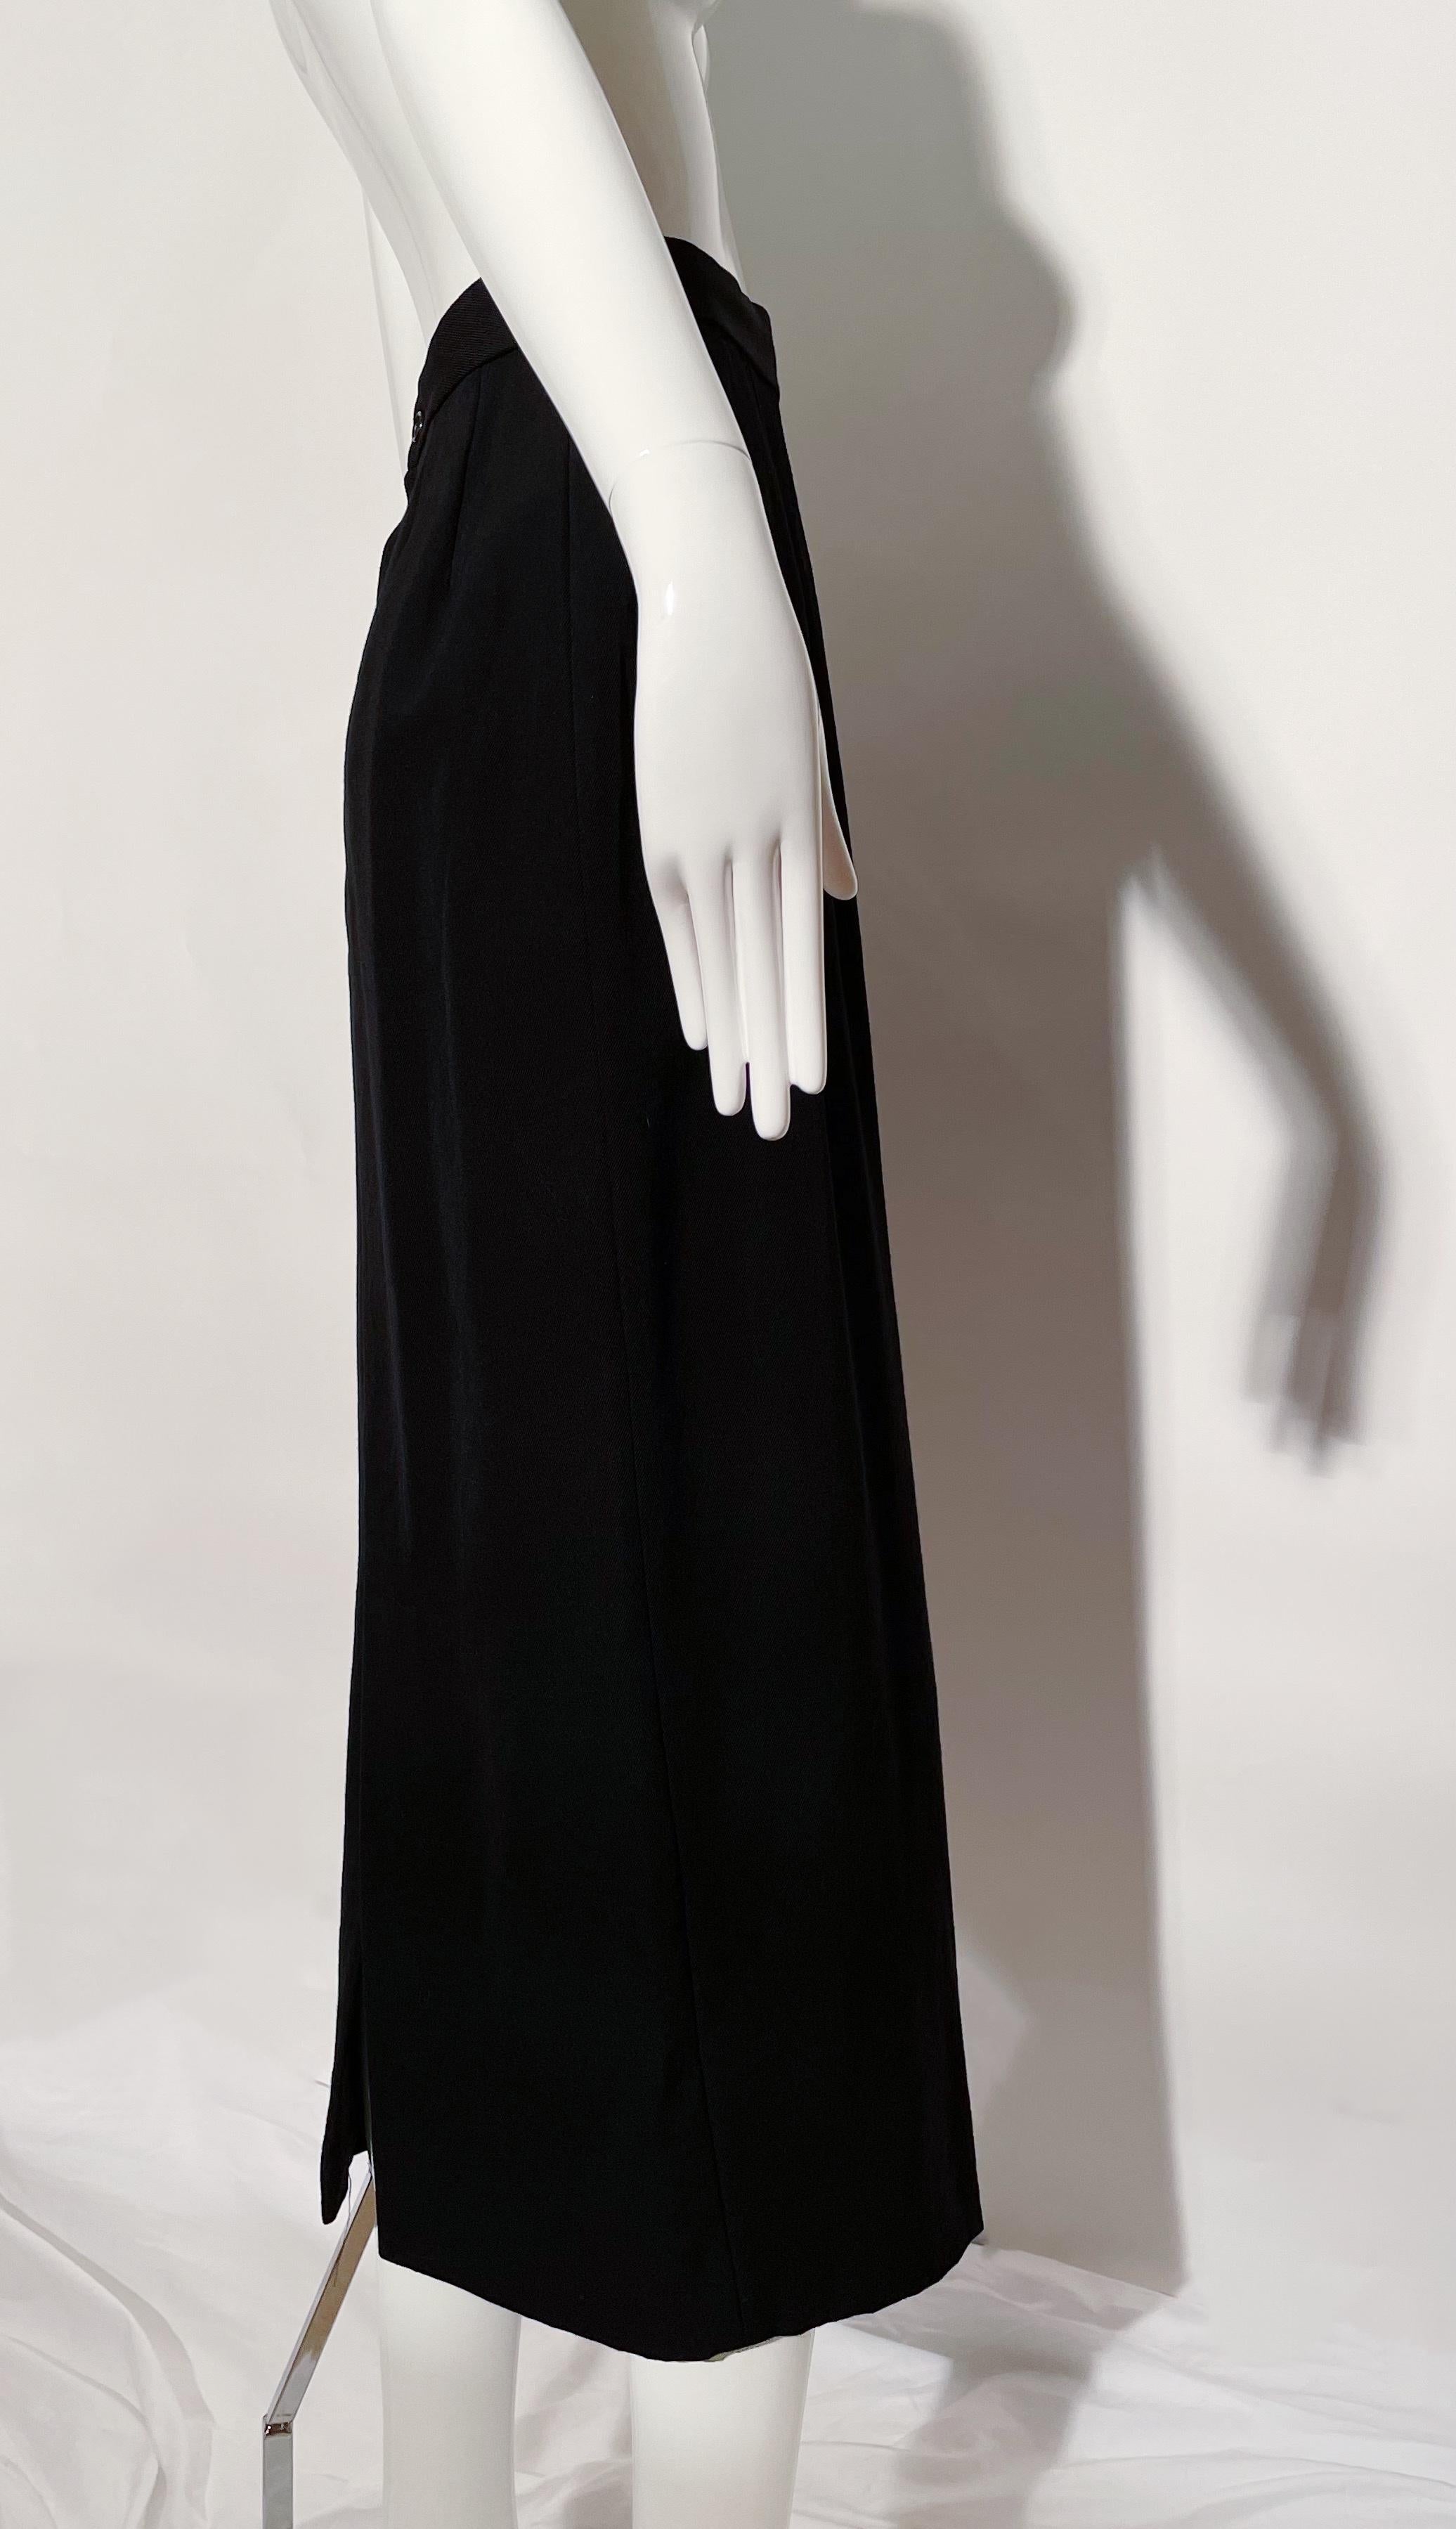 Black maxi skirt. Rear slit. Lined. Wool. Made in Japan. 
*Condition: Excellent vintage condition. No visible flaws.

Measurements Taken Laying Flat (inches)—
Waist: 25 in.
Hip: 34 in.
Length:  36 in.
Marked size: S